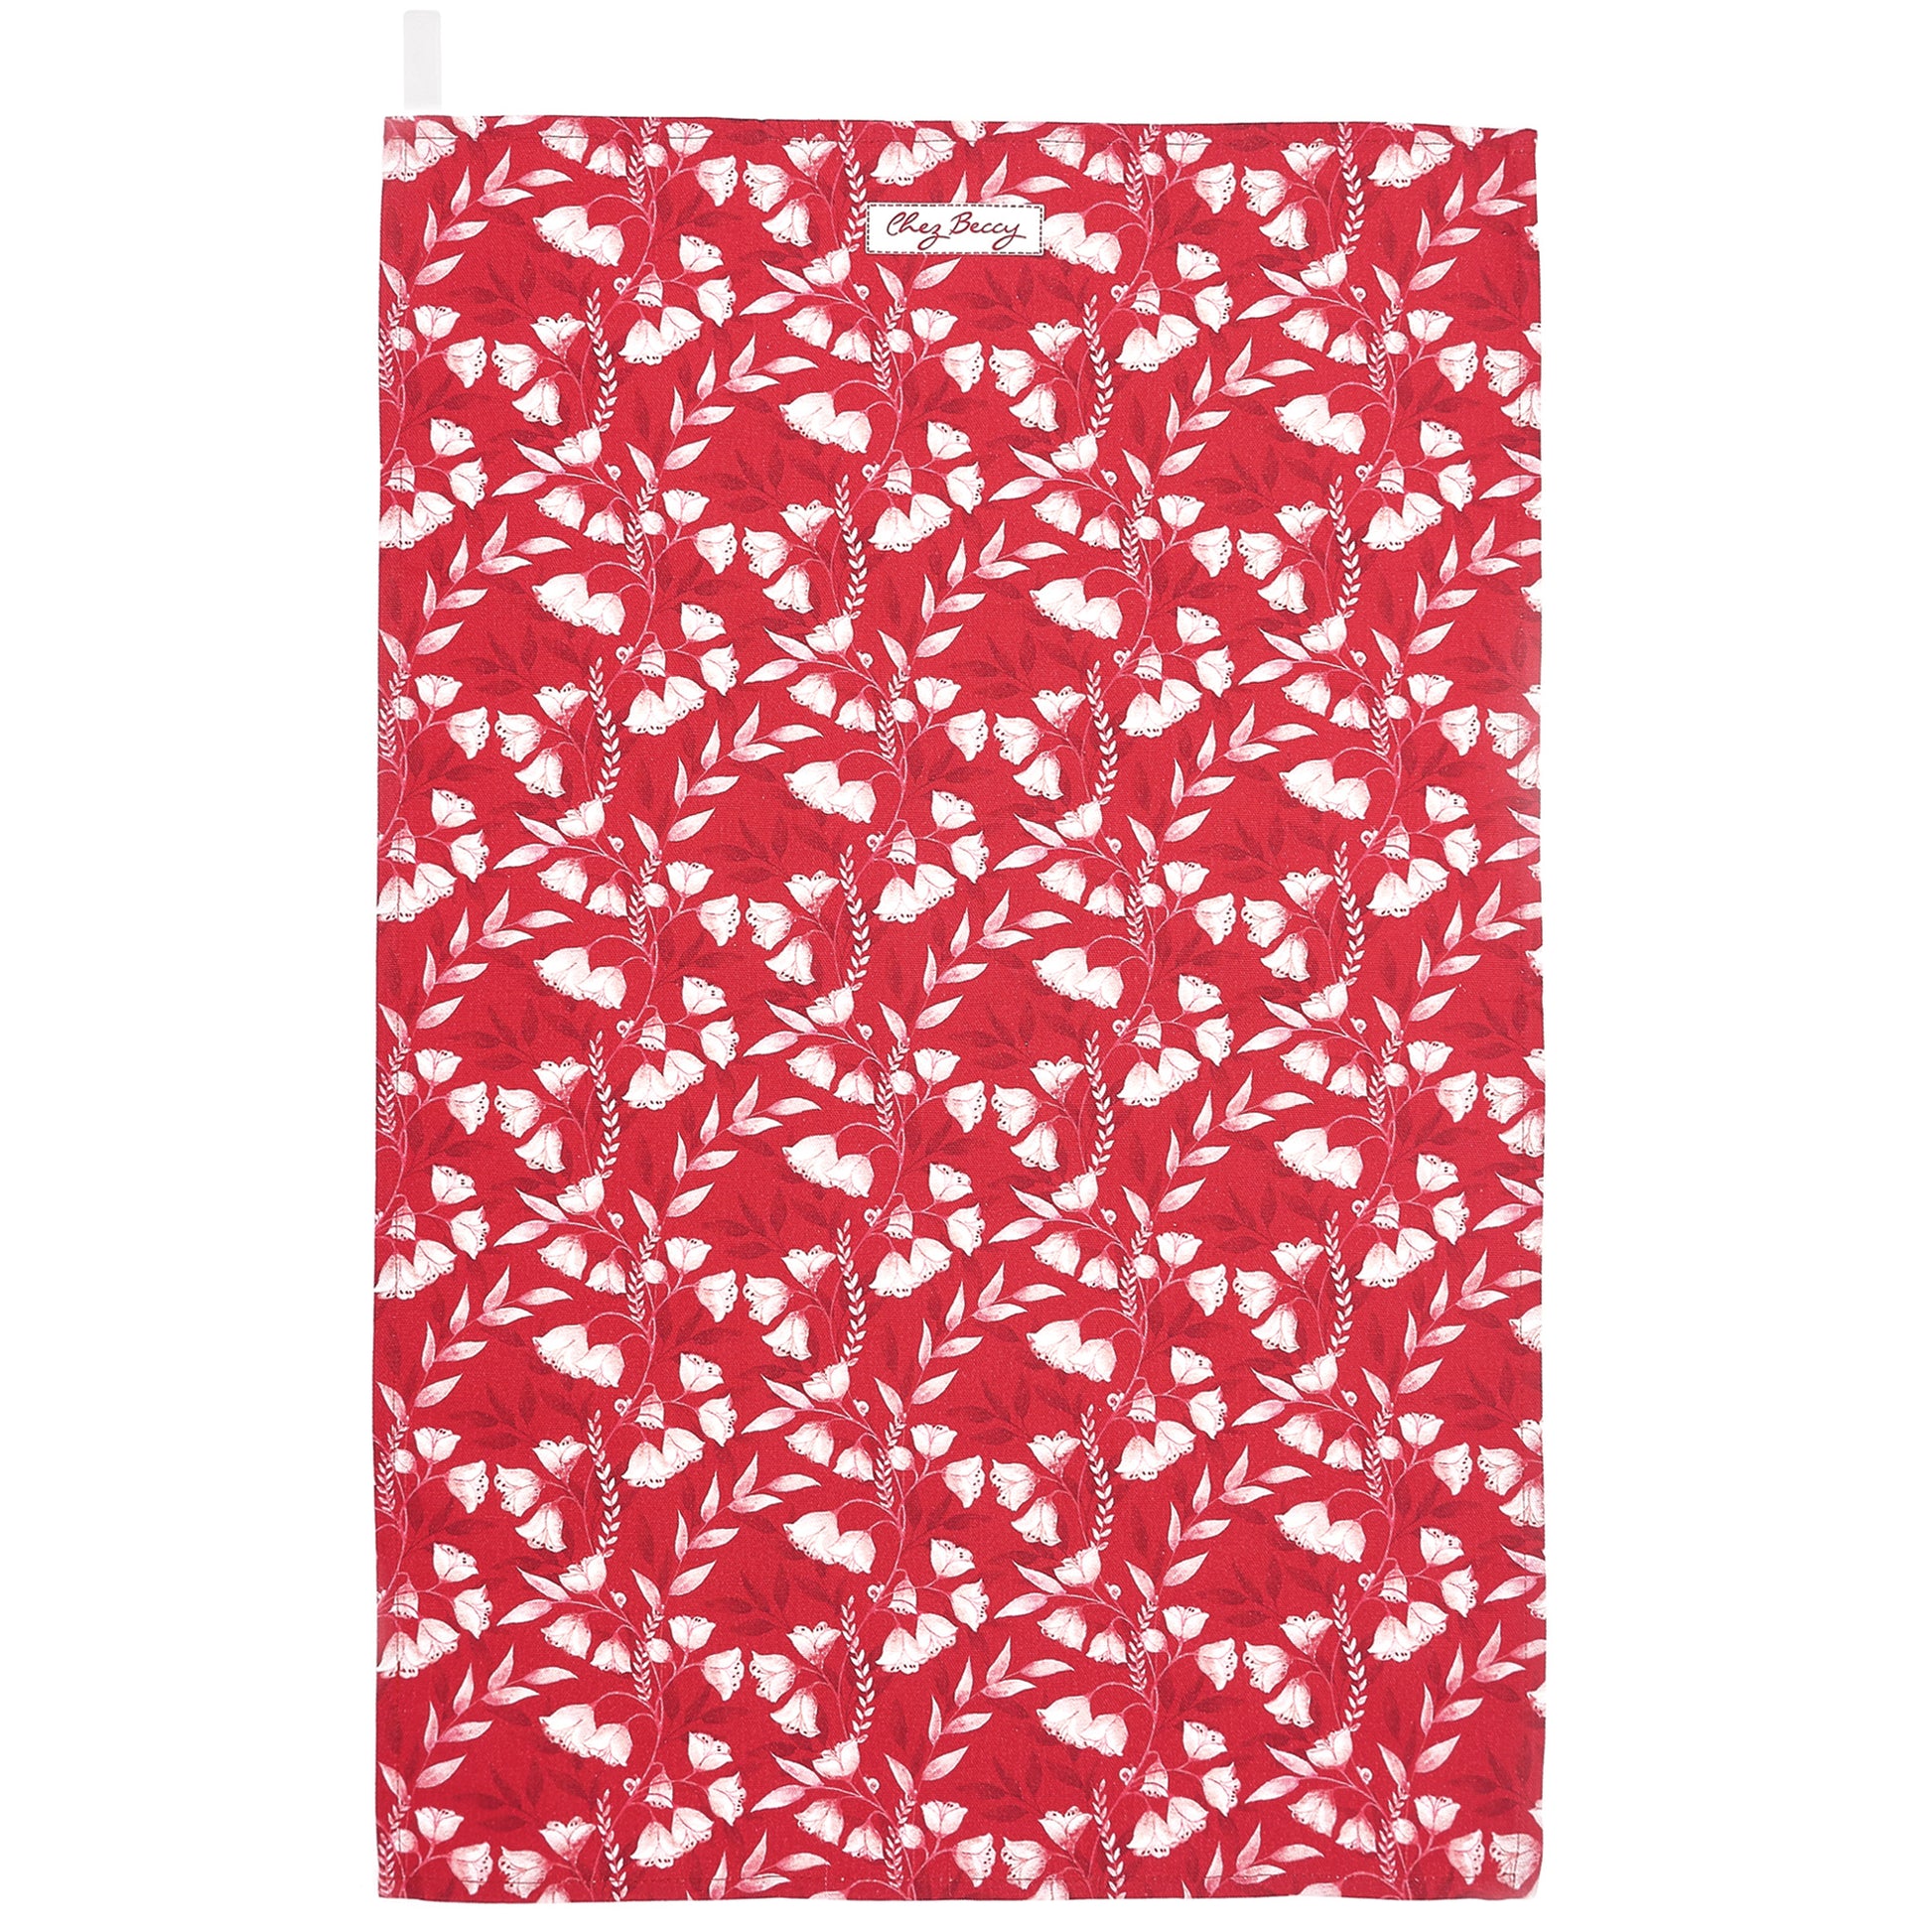 Kitchen textiles, Ruby Red Floral Tea Towel, made in Britain - Chez Beccy